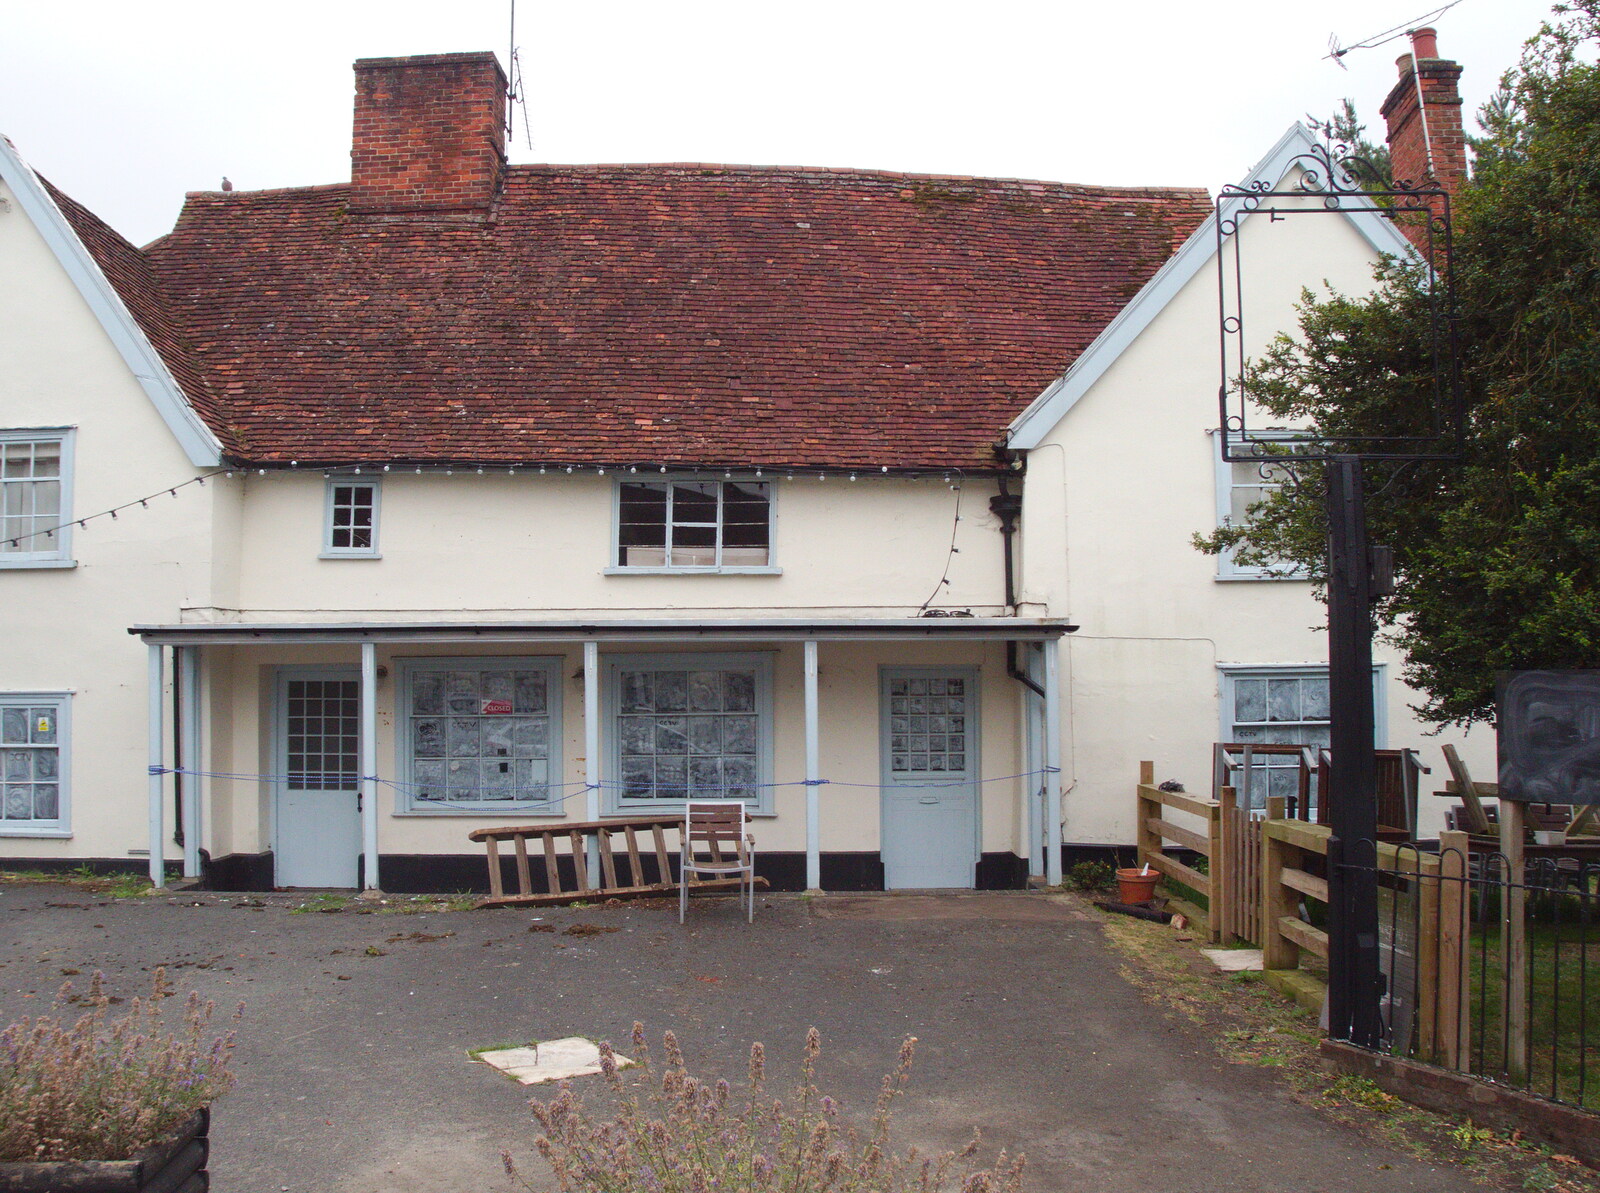 A Postcard from Boxford and BSCC at Pulham, Suffolk and Norfolk - 13th July 2019: The derelict White Hart at Boxford